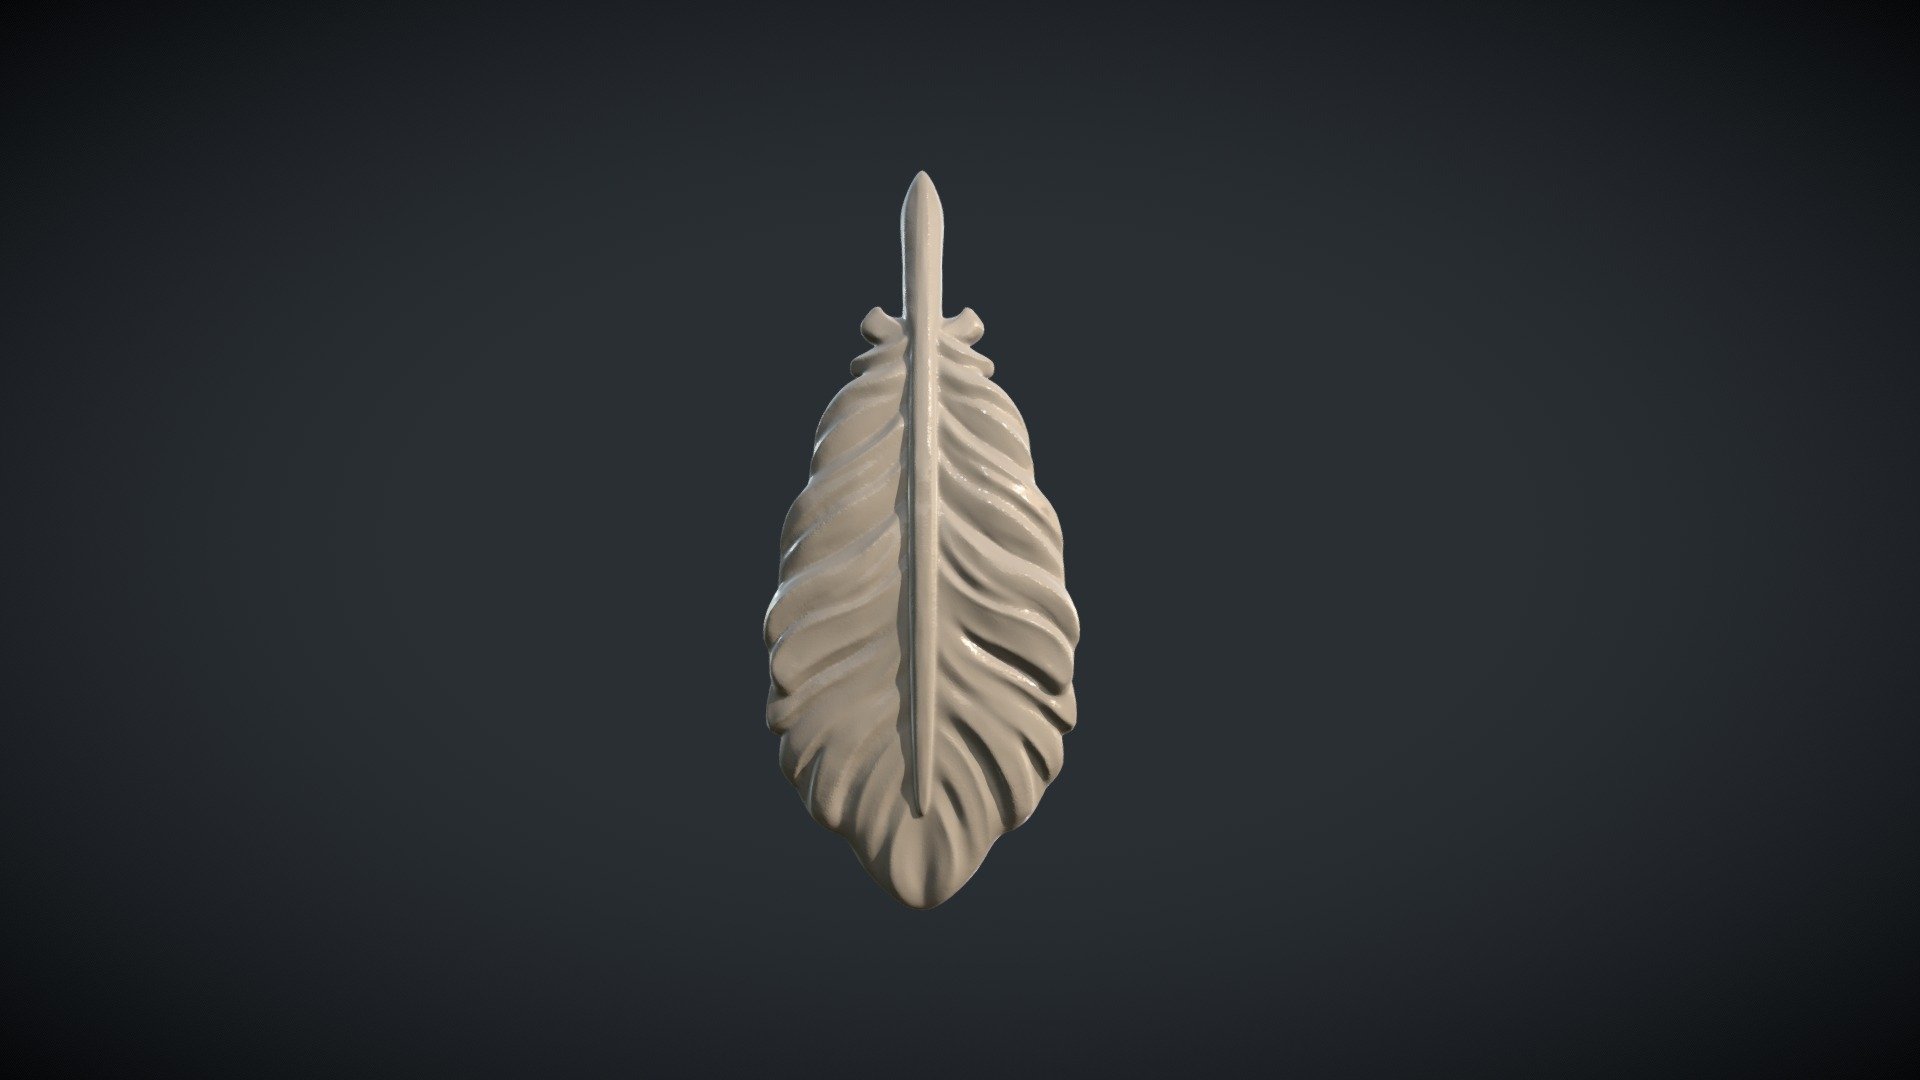 Print ready feather.

Measure units are millimeters, it is about 4 cm in Height.

Mesh is manifold, no holes, no inverted faces, no bad contiguous edges.

The model consists of 159706 triangular faces. 

Available formats: .blend, .stl, .obj, .fbx - Bird Feather - Buy Royalty Free 3D model by Skazok 3d model